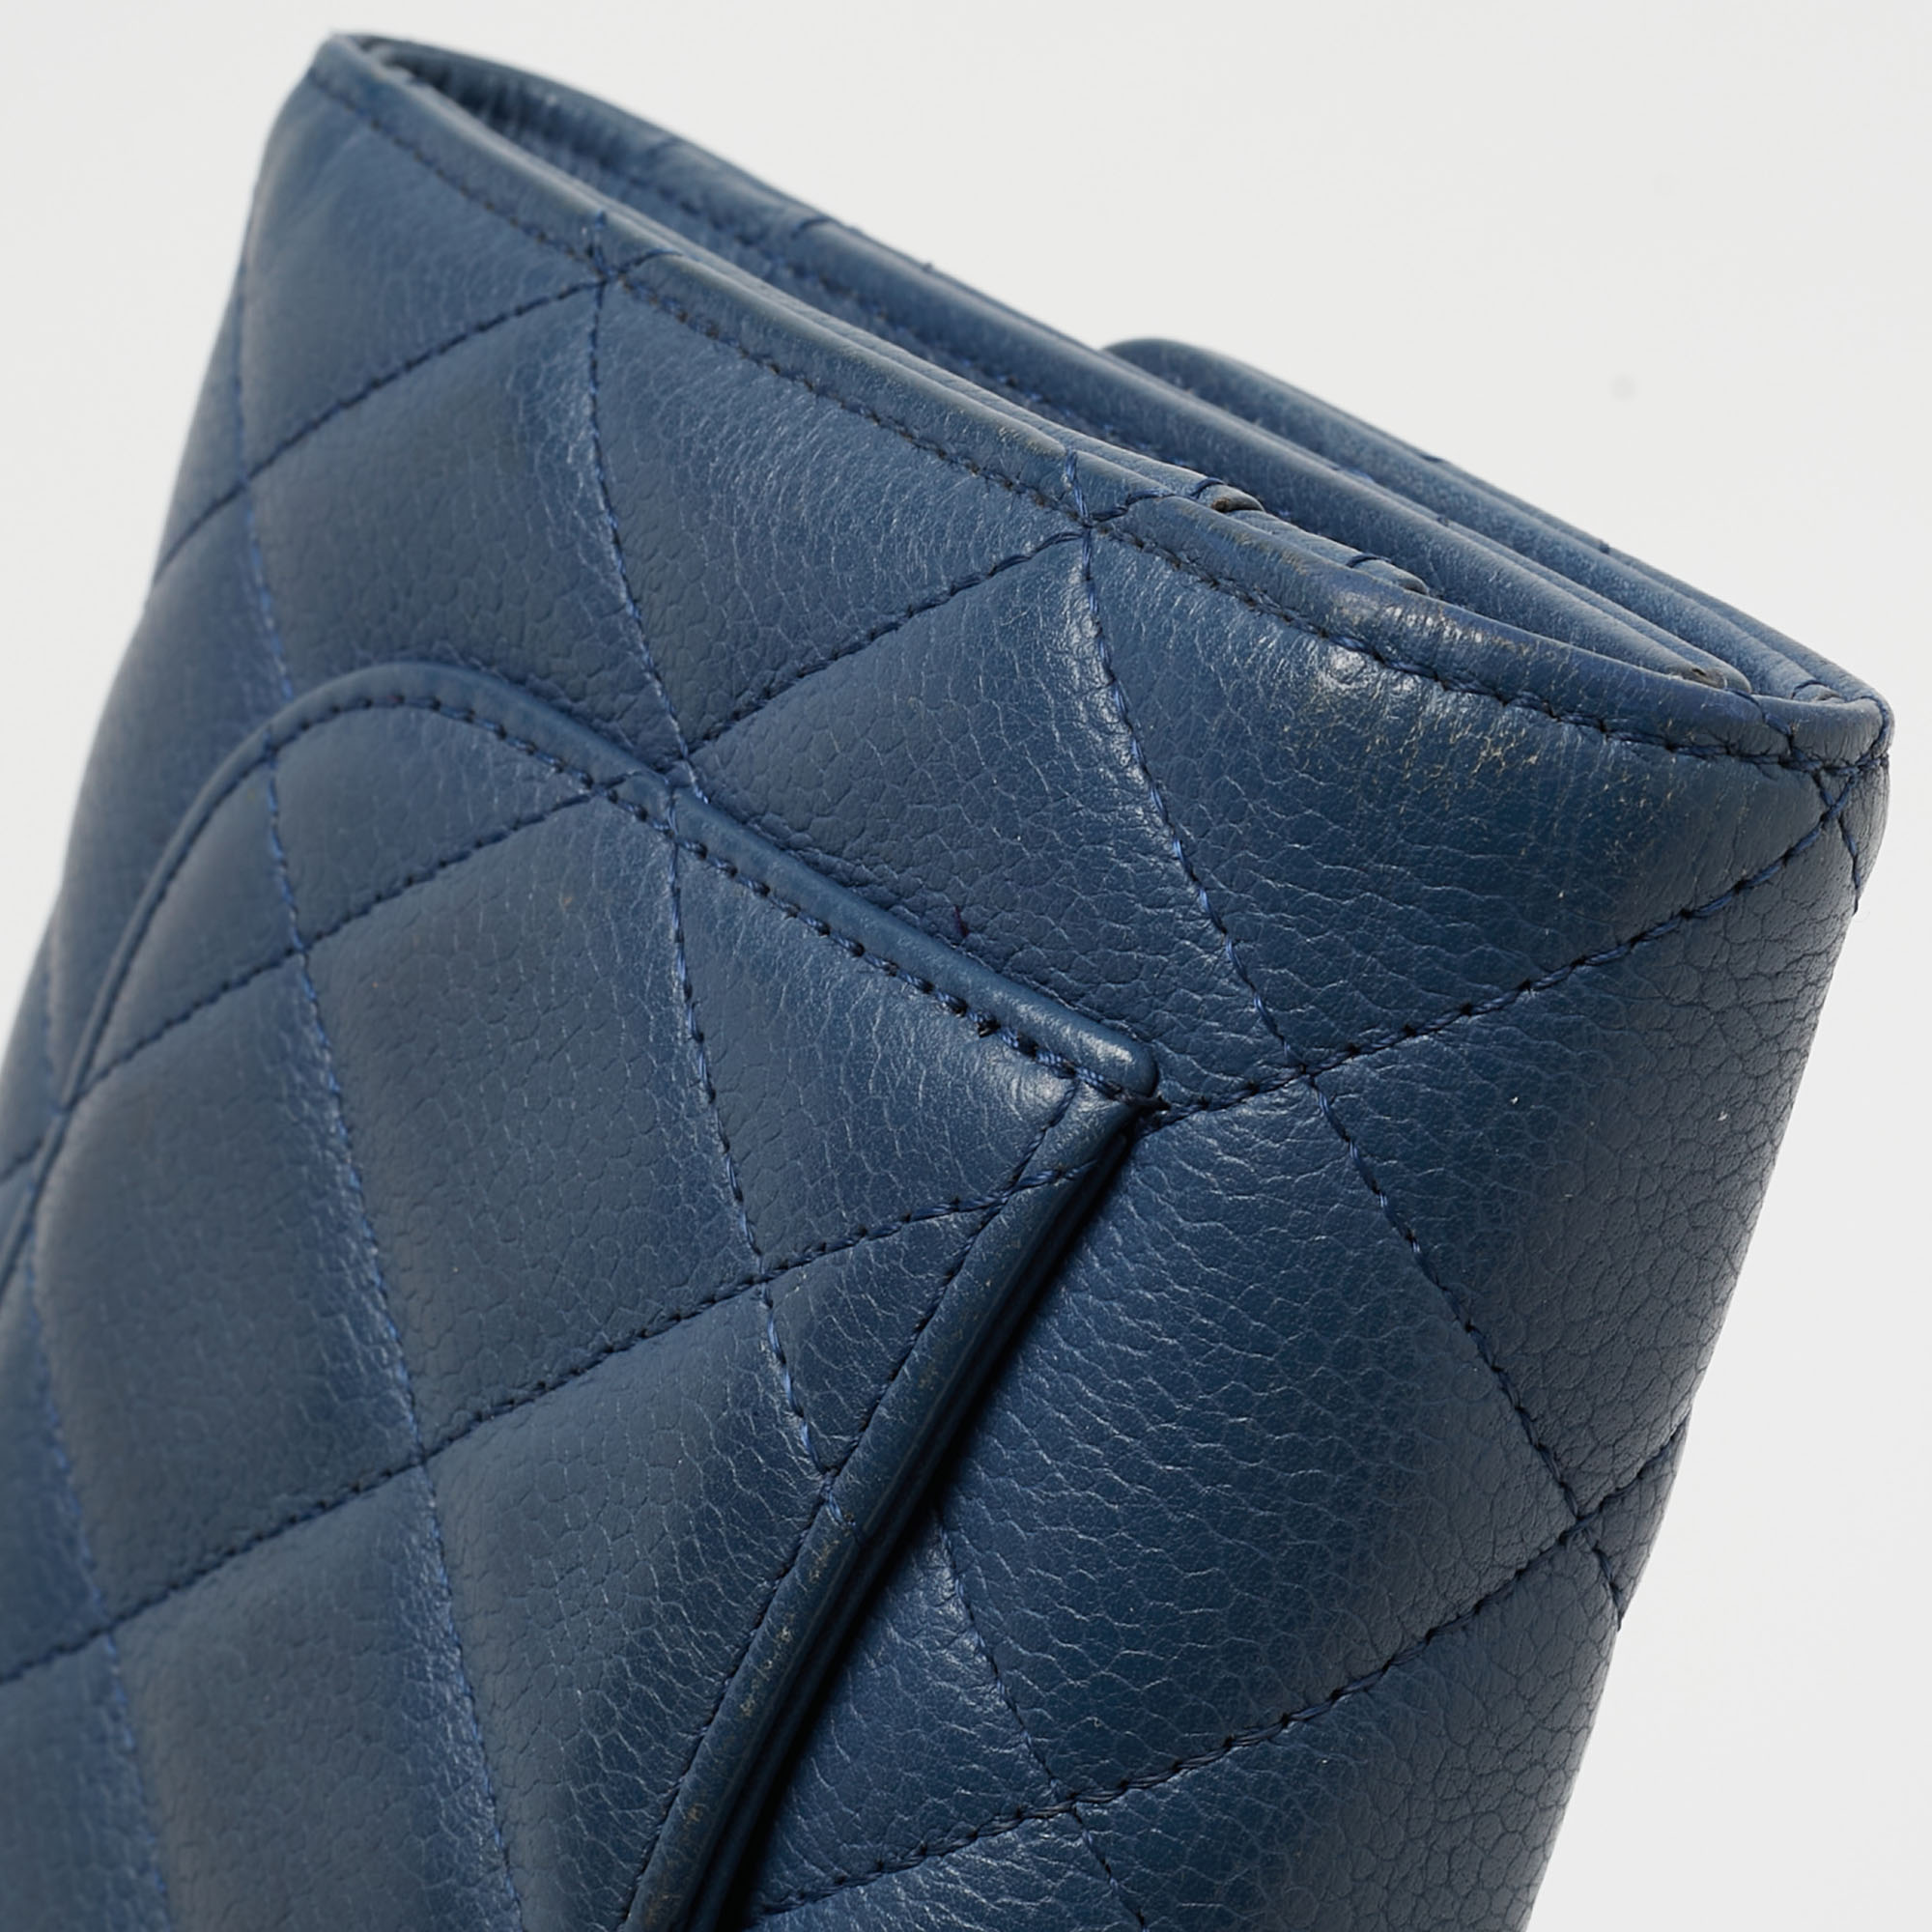 Chanel Blue Quilted Caviar Leather Classic Flap Wallet